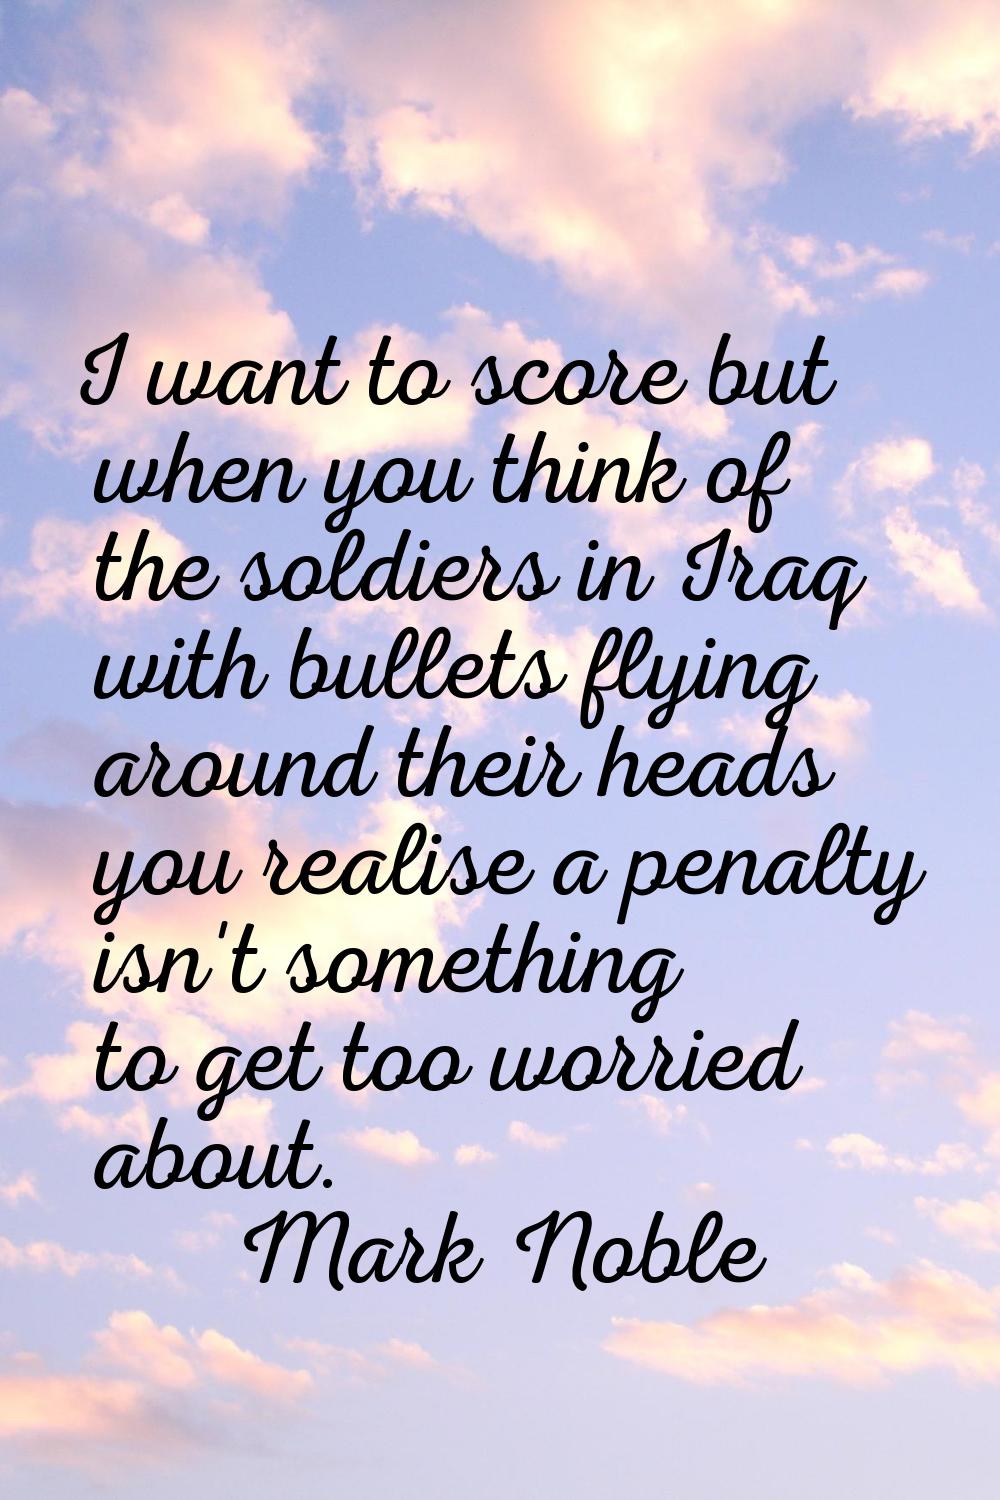 I want to score but when you think of the soldiers in Iraq with bullets flying around their heads y